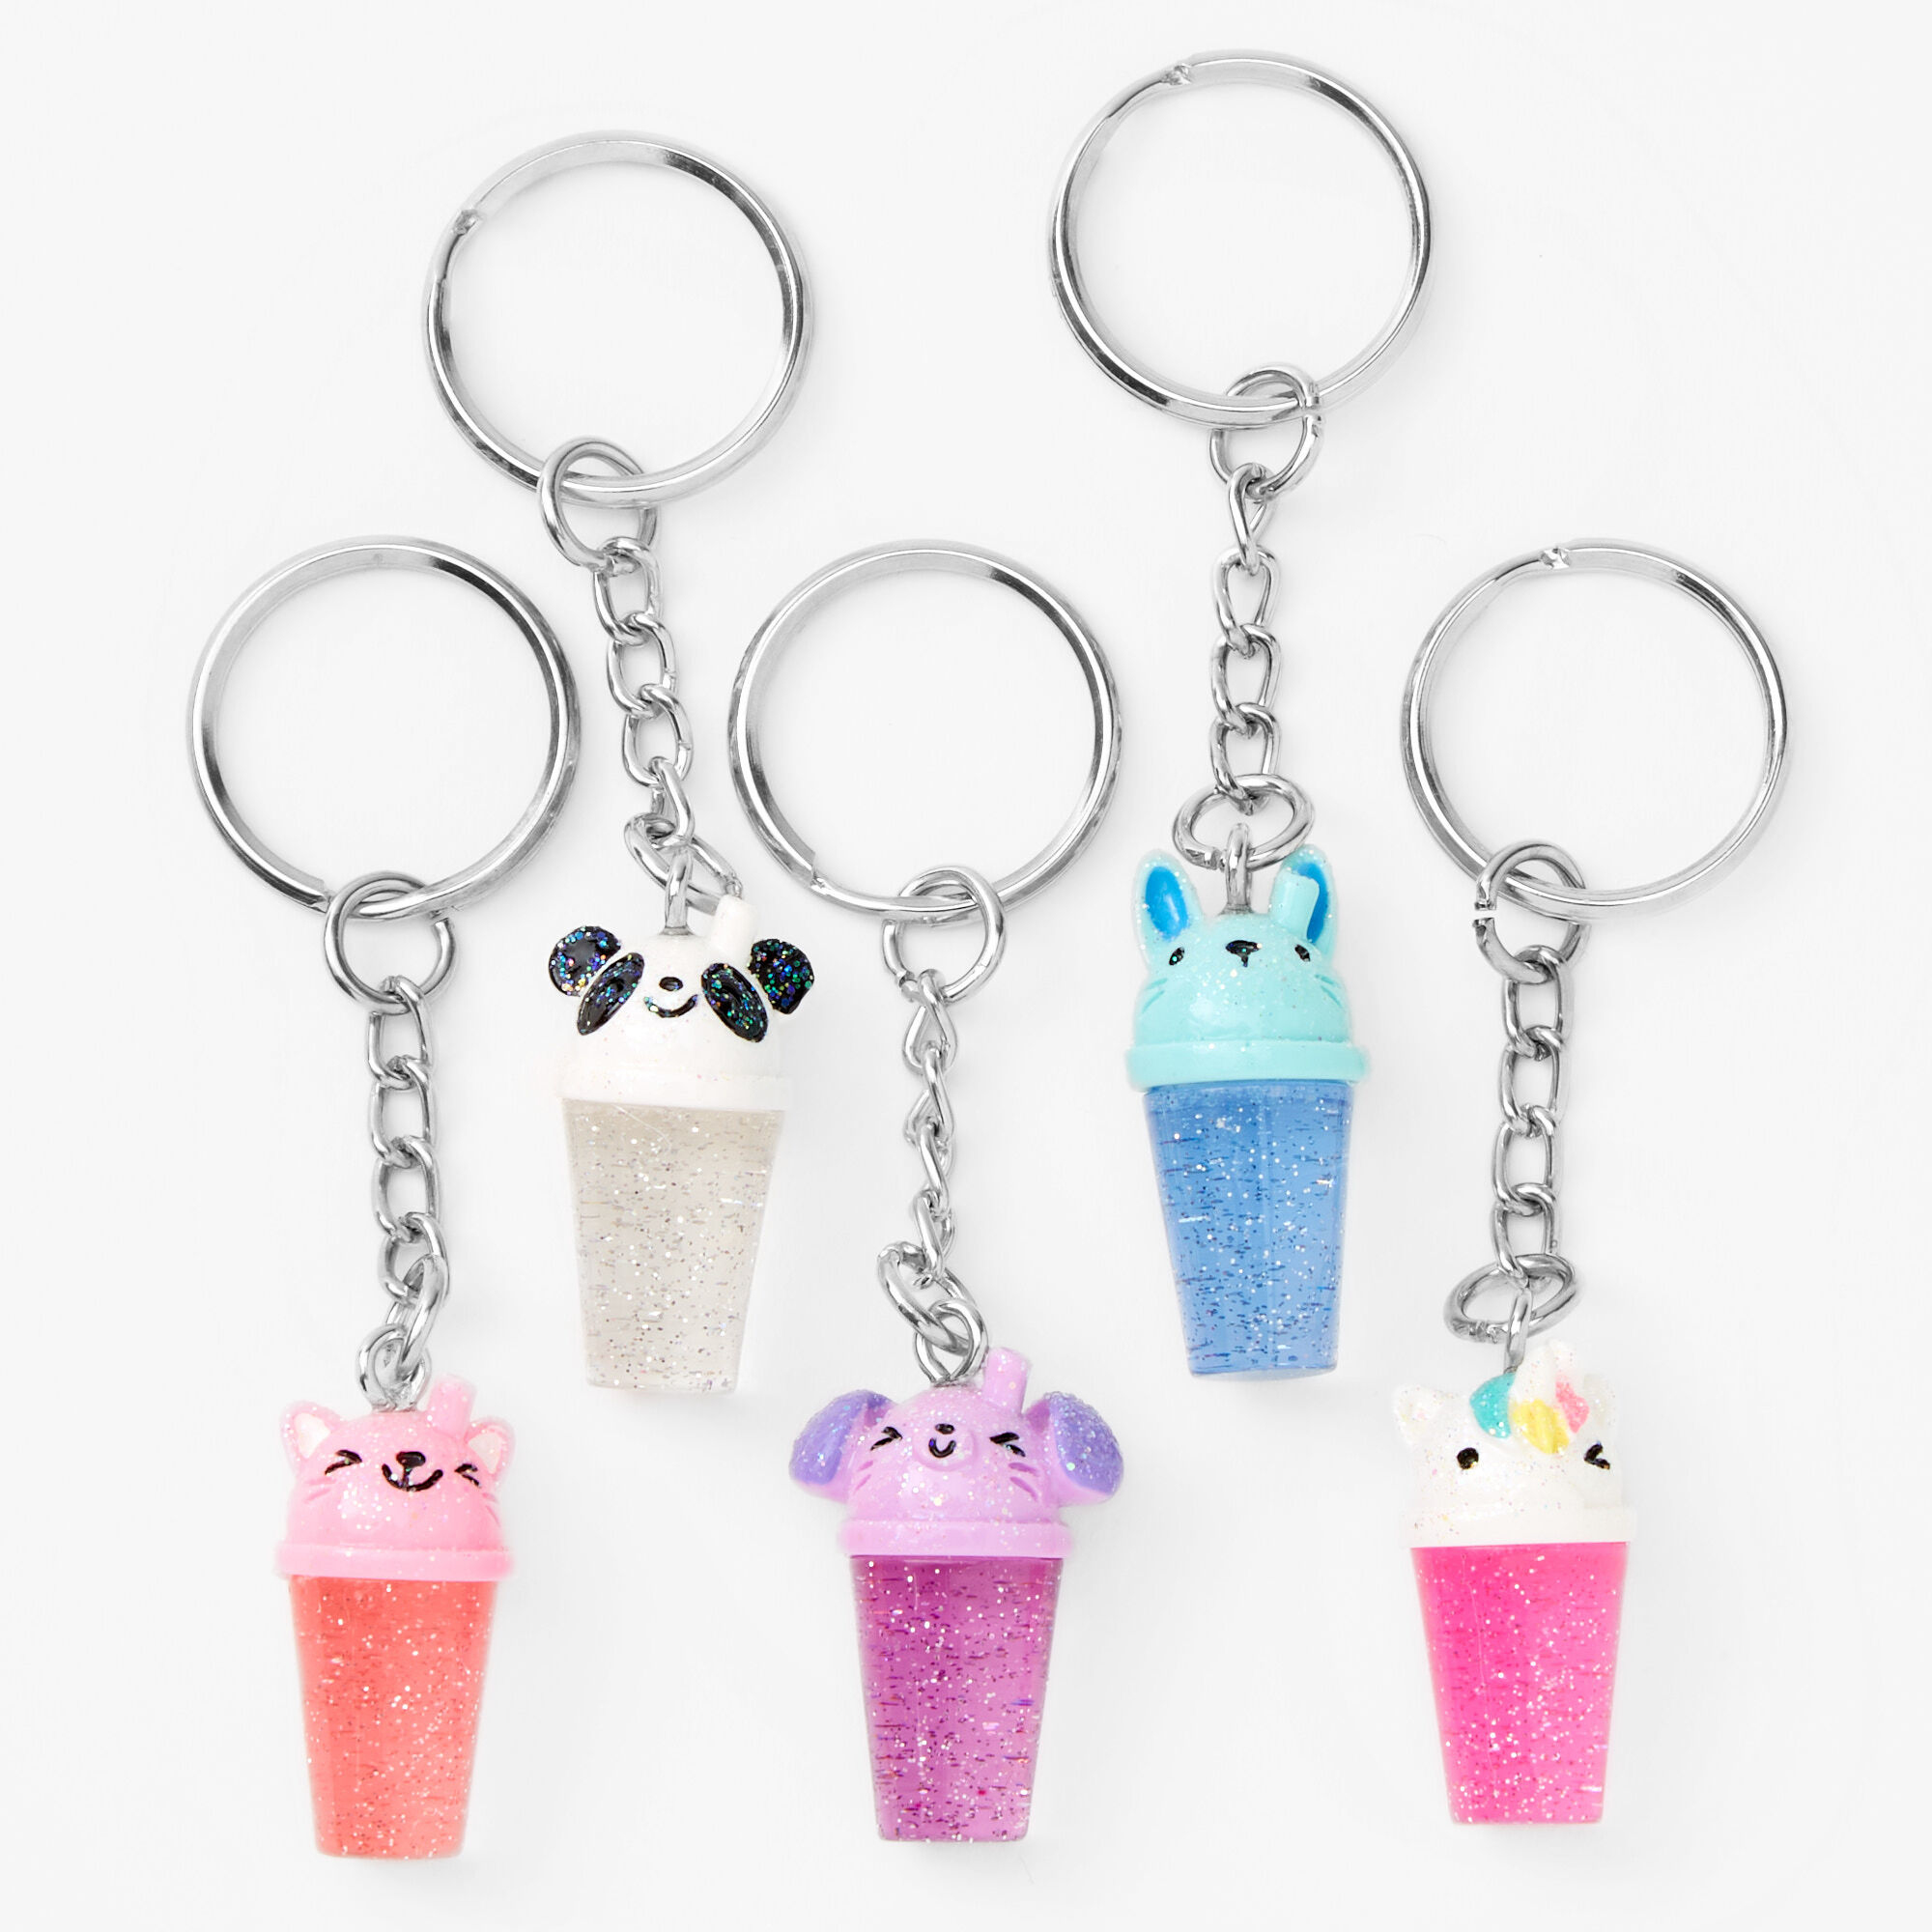 View Claires Bff Glitter Bubble Tea Keyrings 5 Pack Silver information